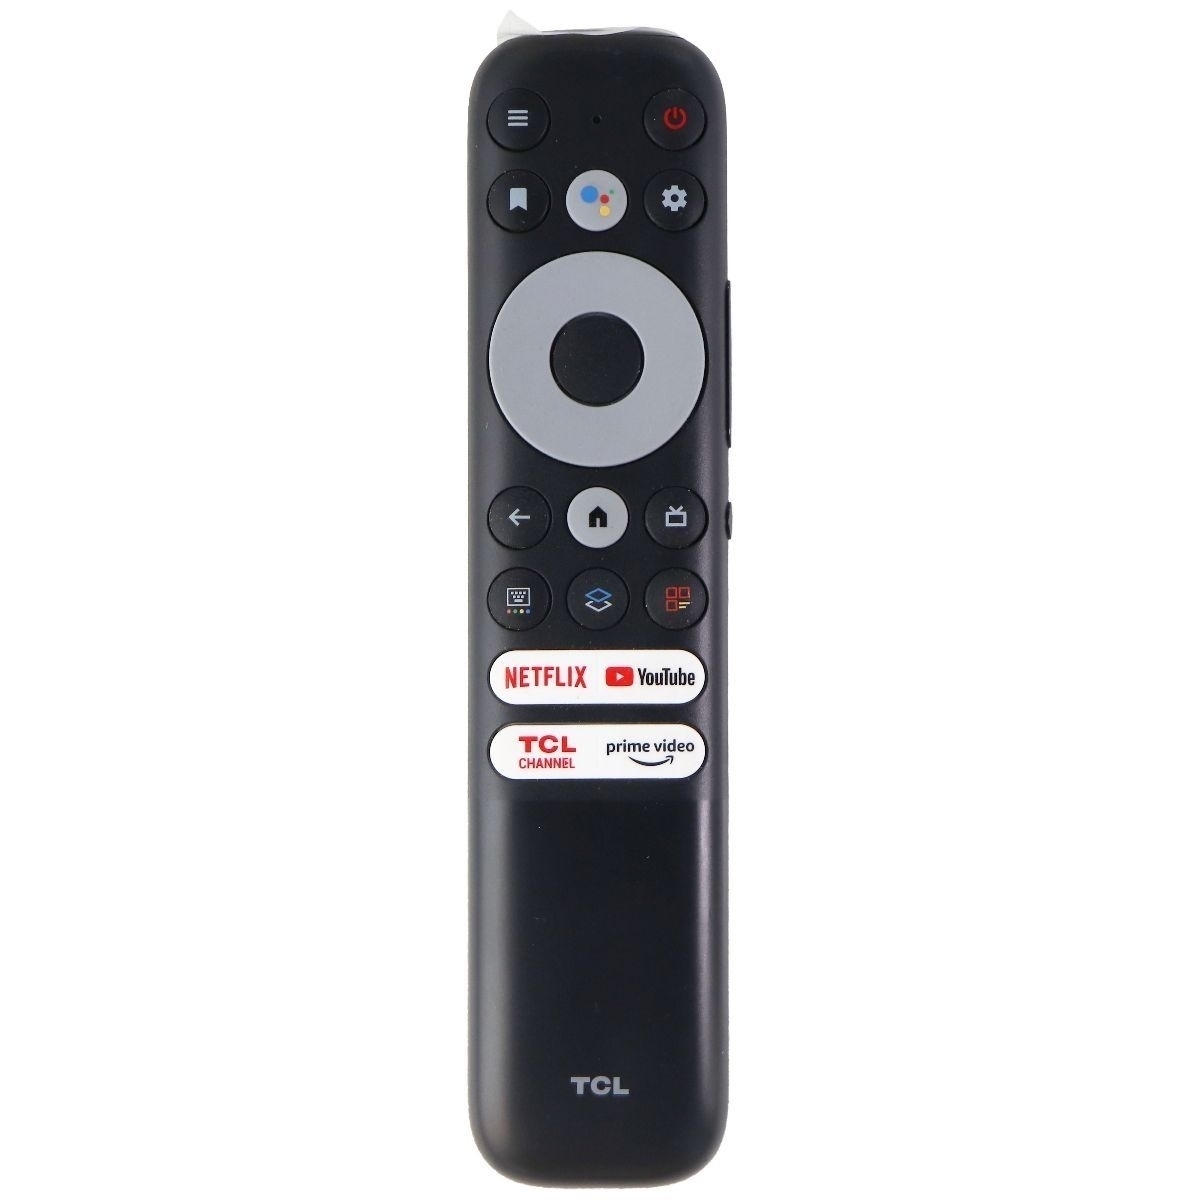 TCL Remote Control (RC902N FMR1) With Netflix/Youtube Hotkeys - Black